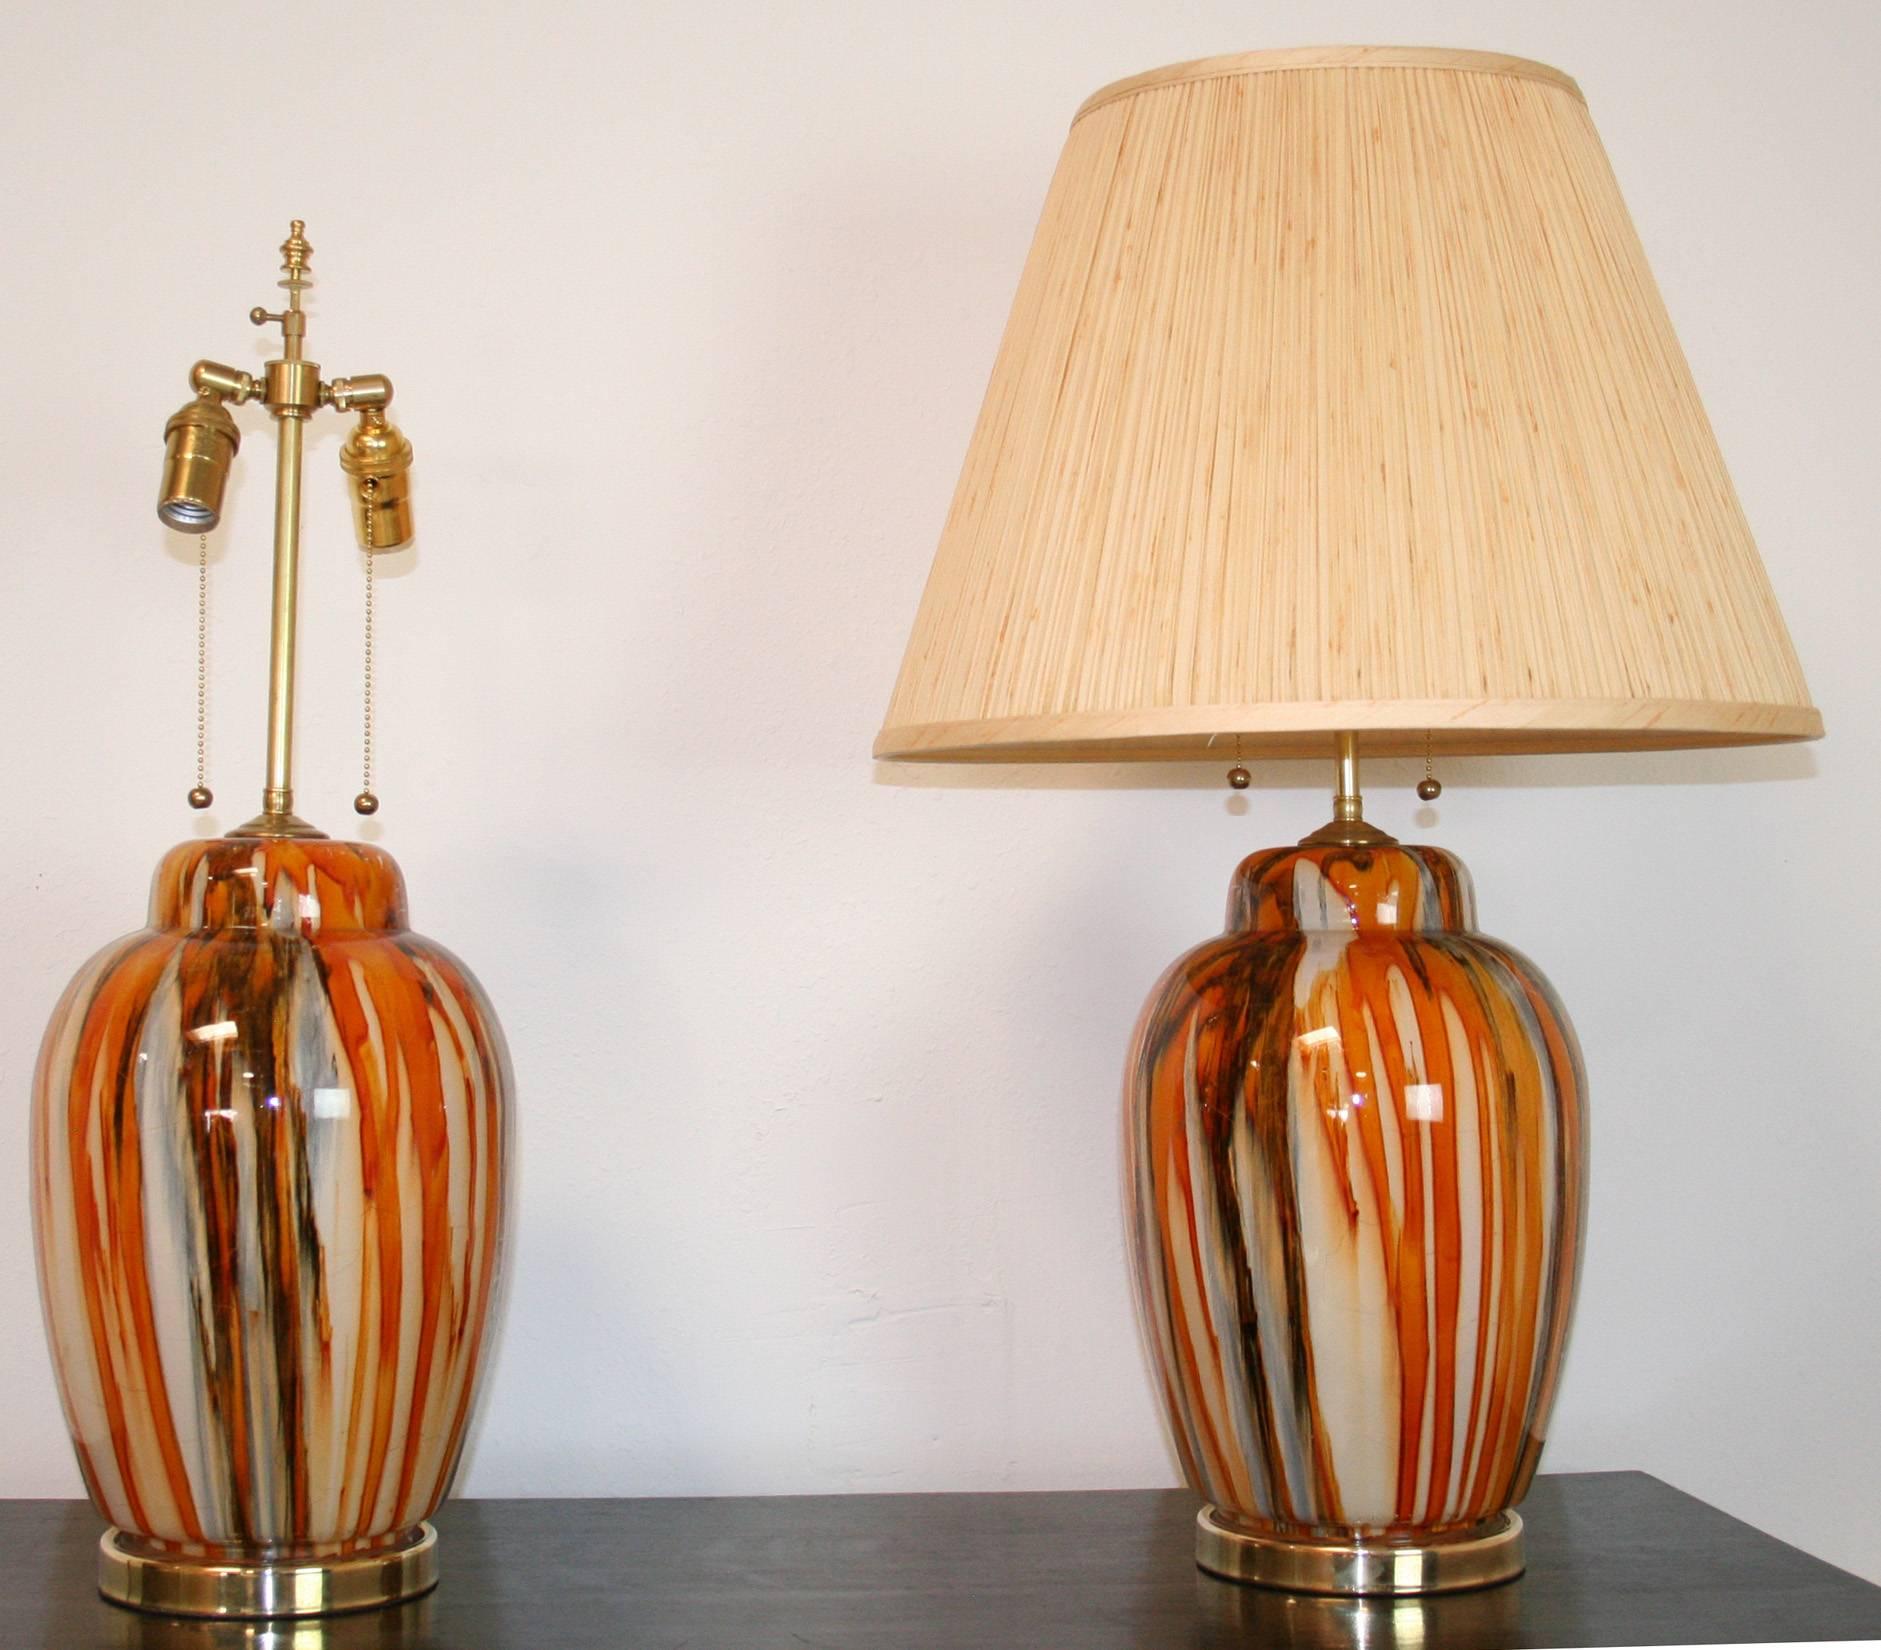 A pair of 1980s Italian glass lamps in cream, orange and brown. Rewired with new double cluster sockets. Shades for display only. Mid-Century Modern style.